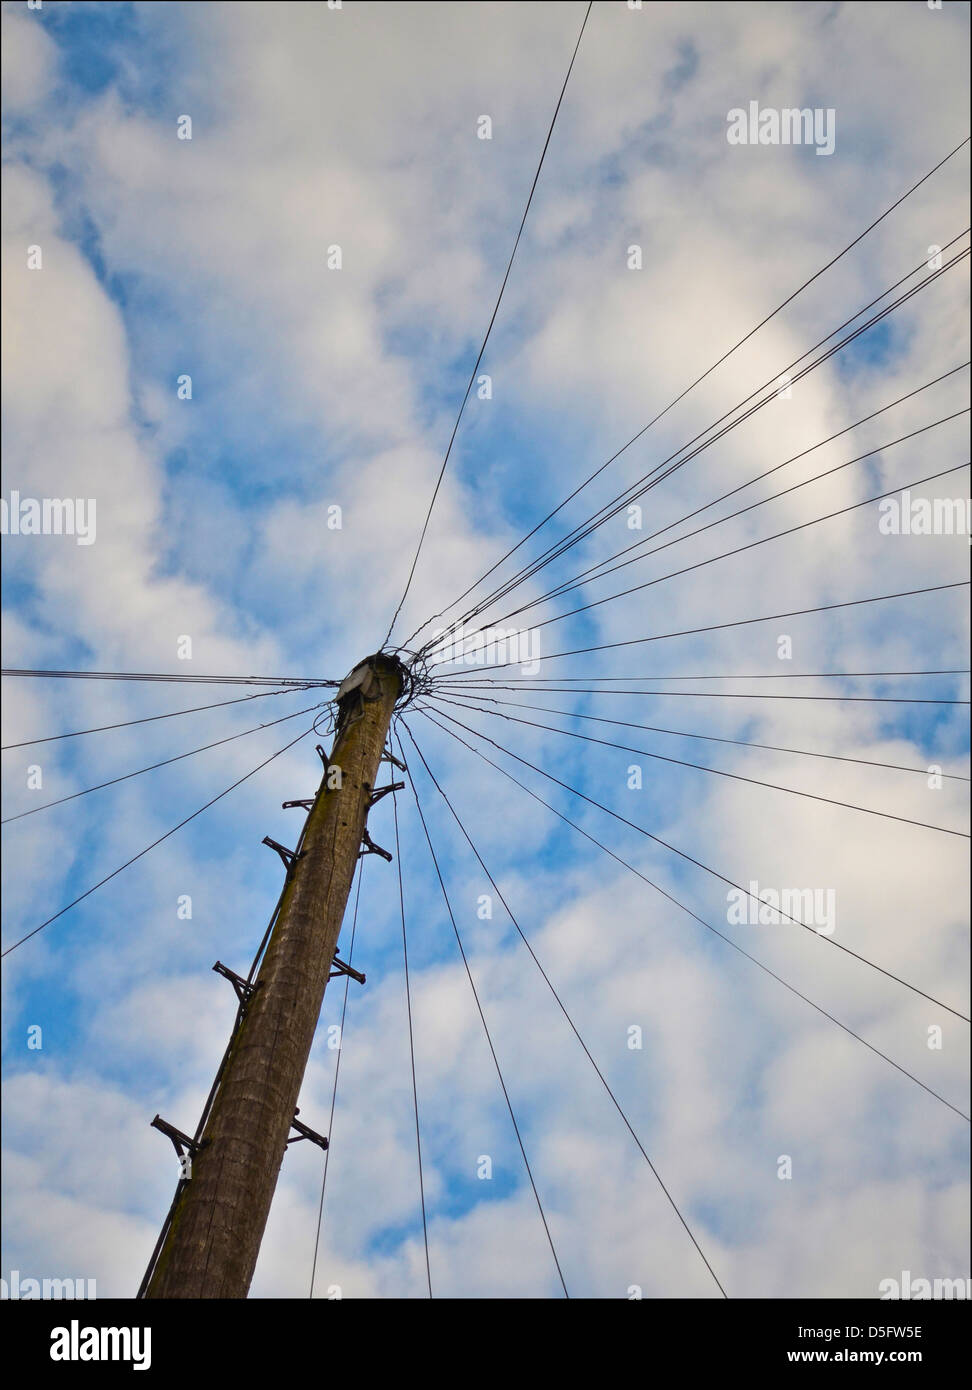 OLD FASHIONED TELEPHONE POLE WITH LINES RUNNING TO HOUSES AND CLIMBING STEPS AGAINST A BLUE SKY Stock Photo